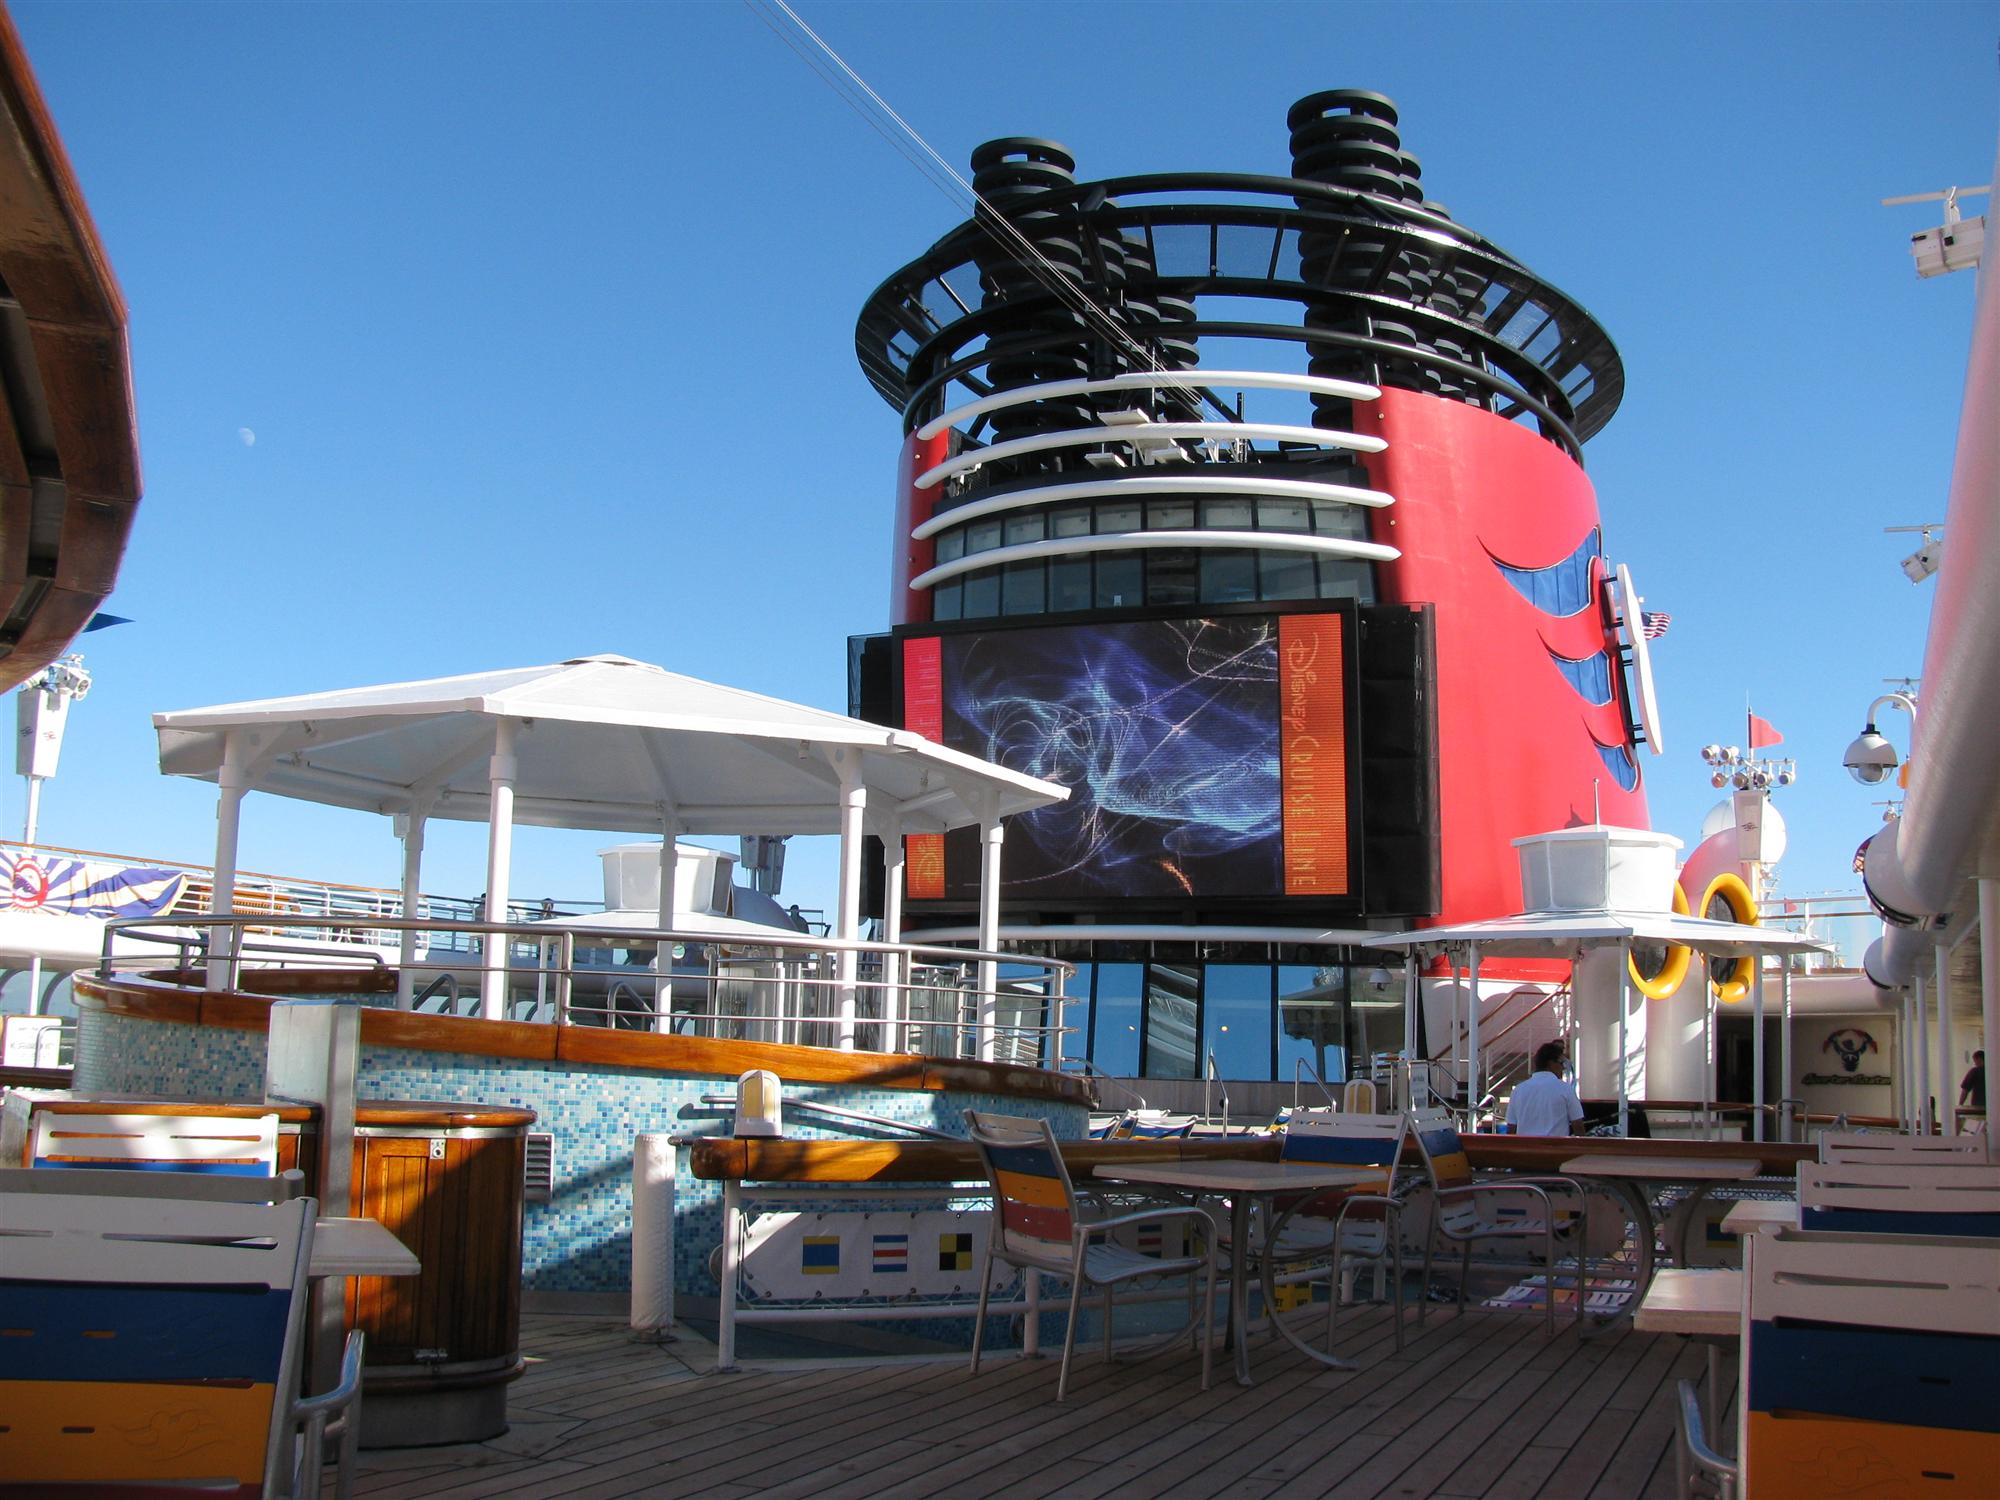 Discover the activities onboard the Disney Cruise Line |PassPorter.com